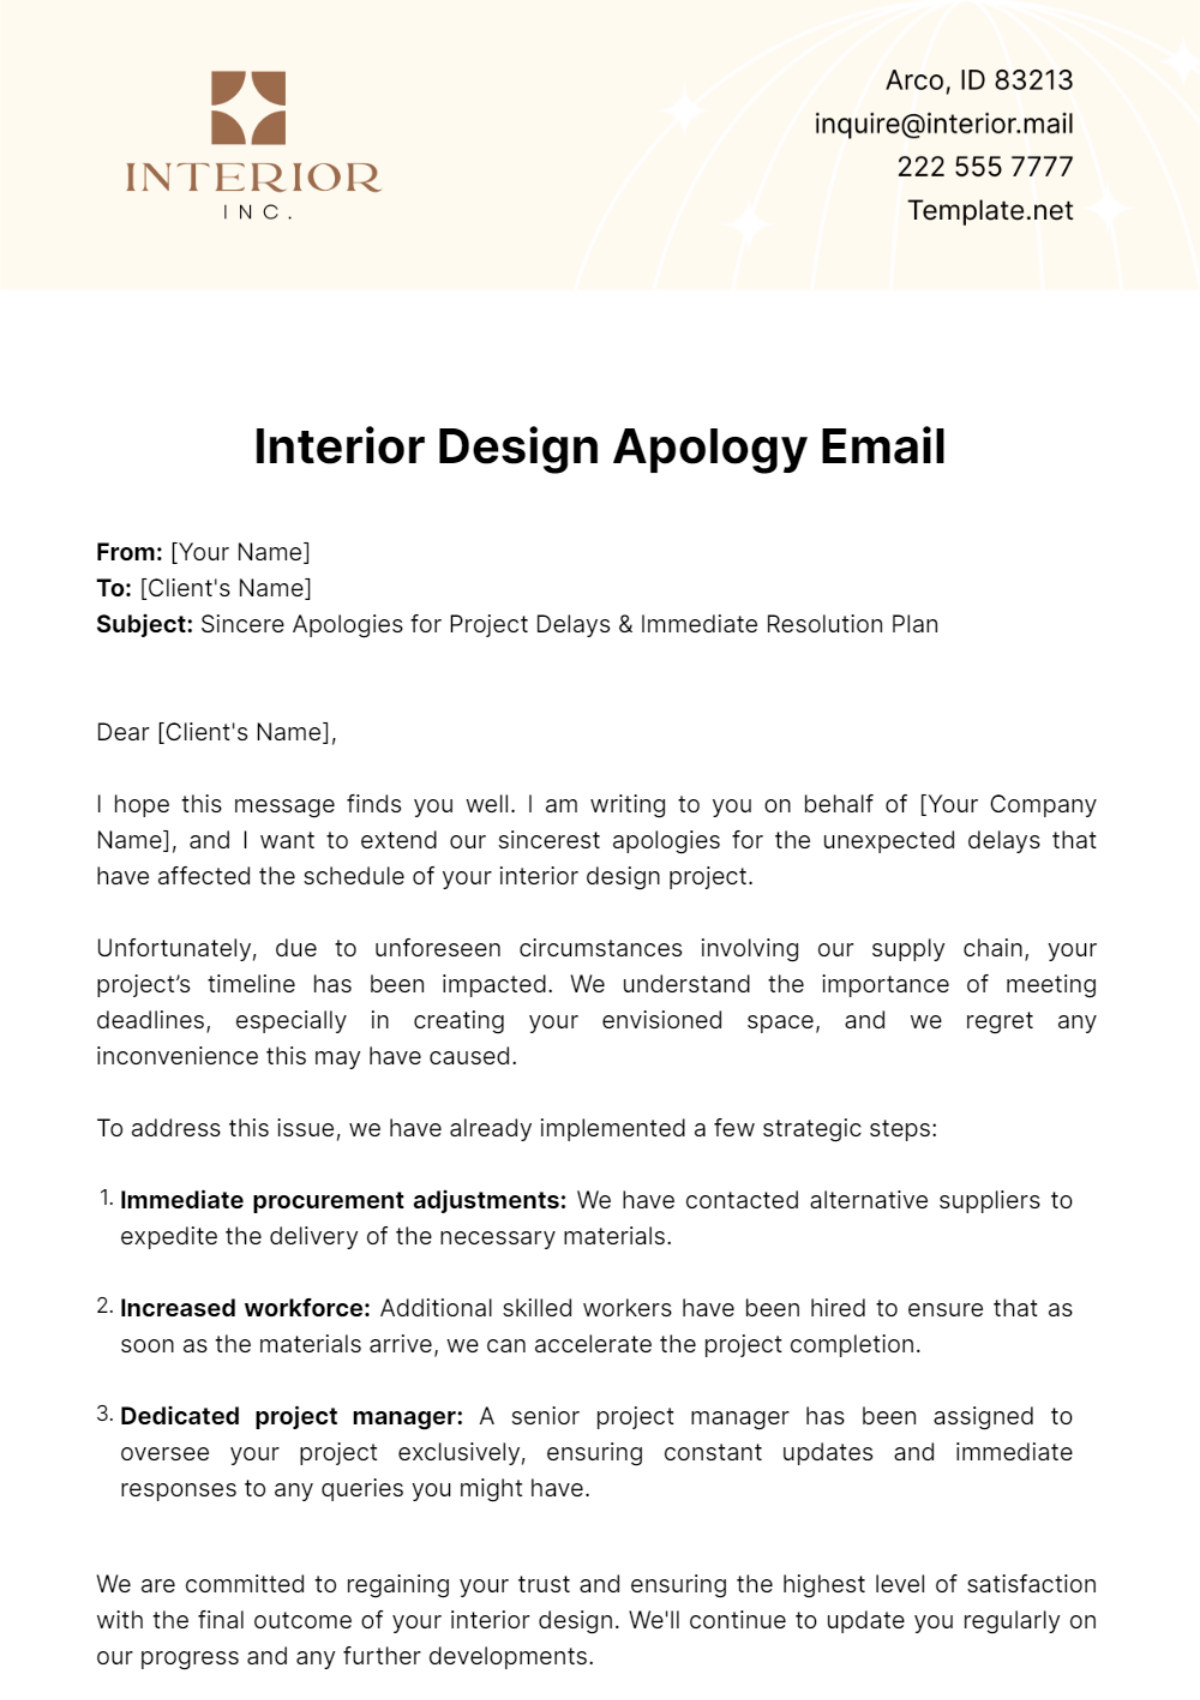 Free Interior Design Apology Email Template